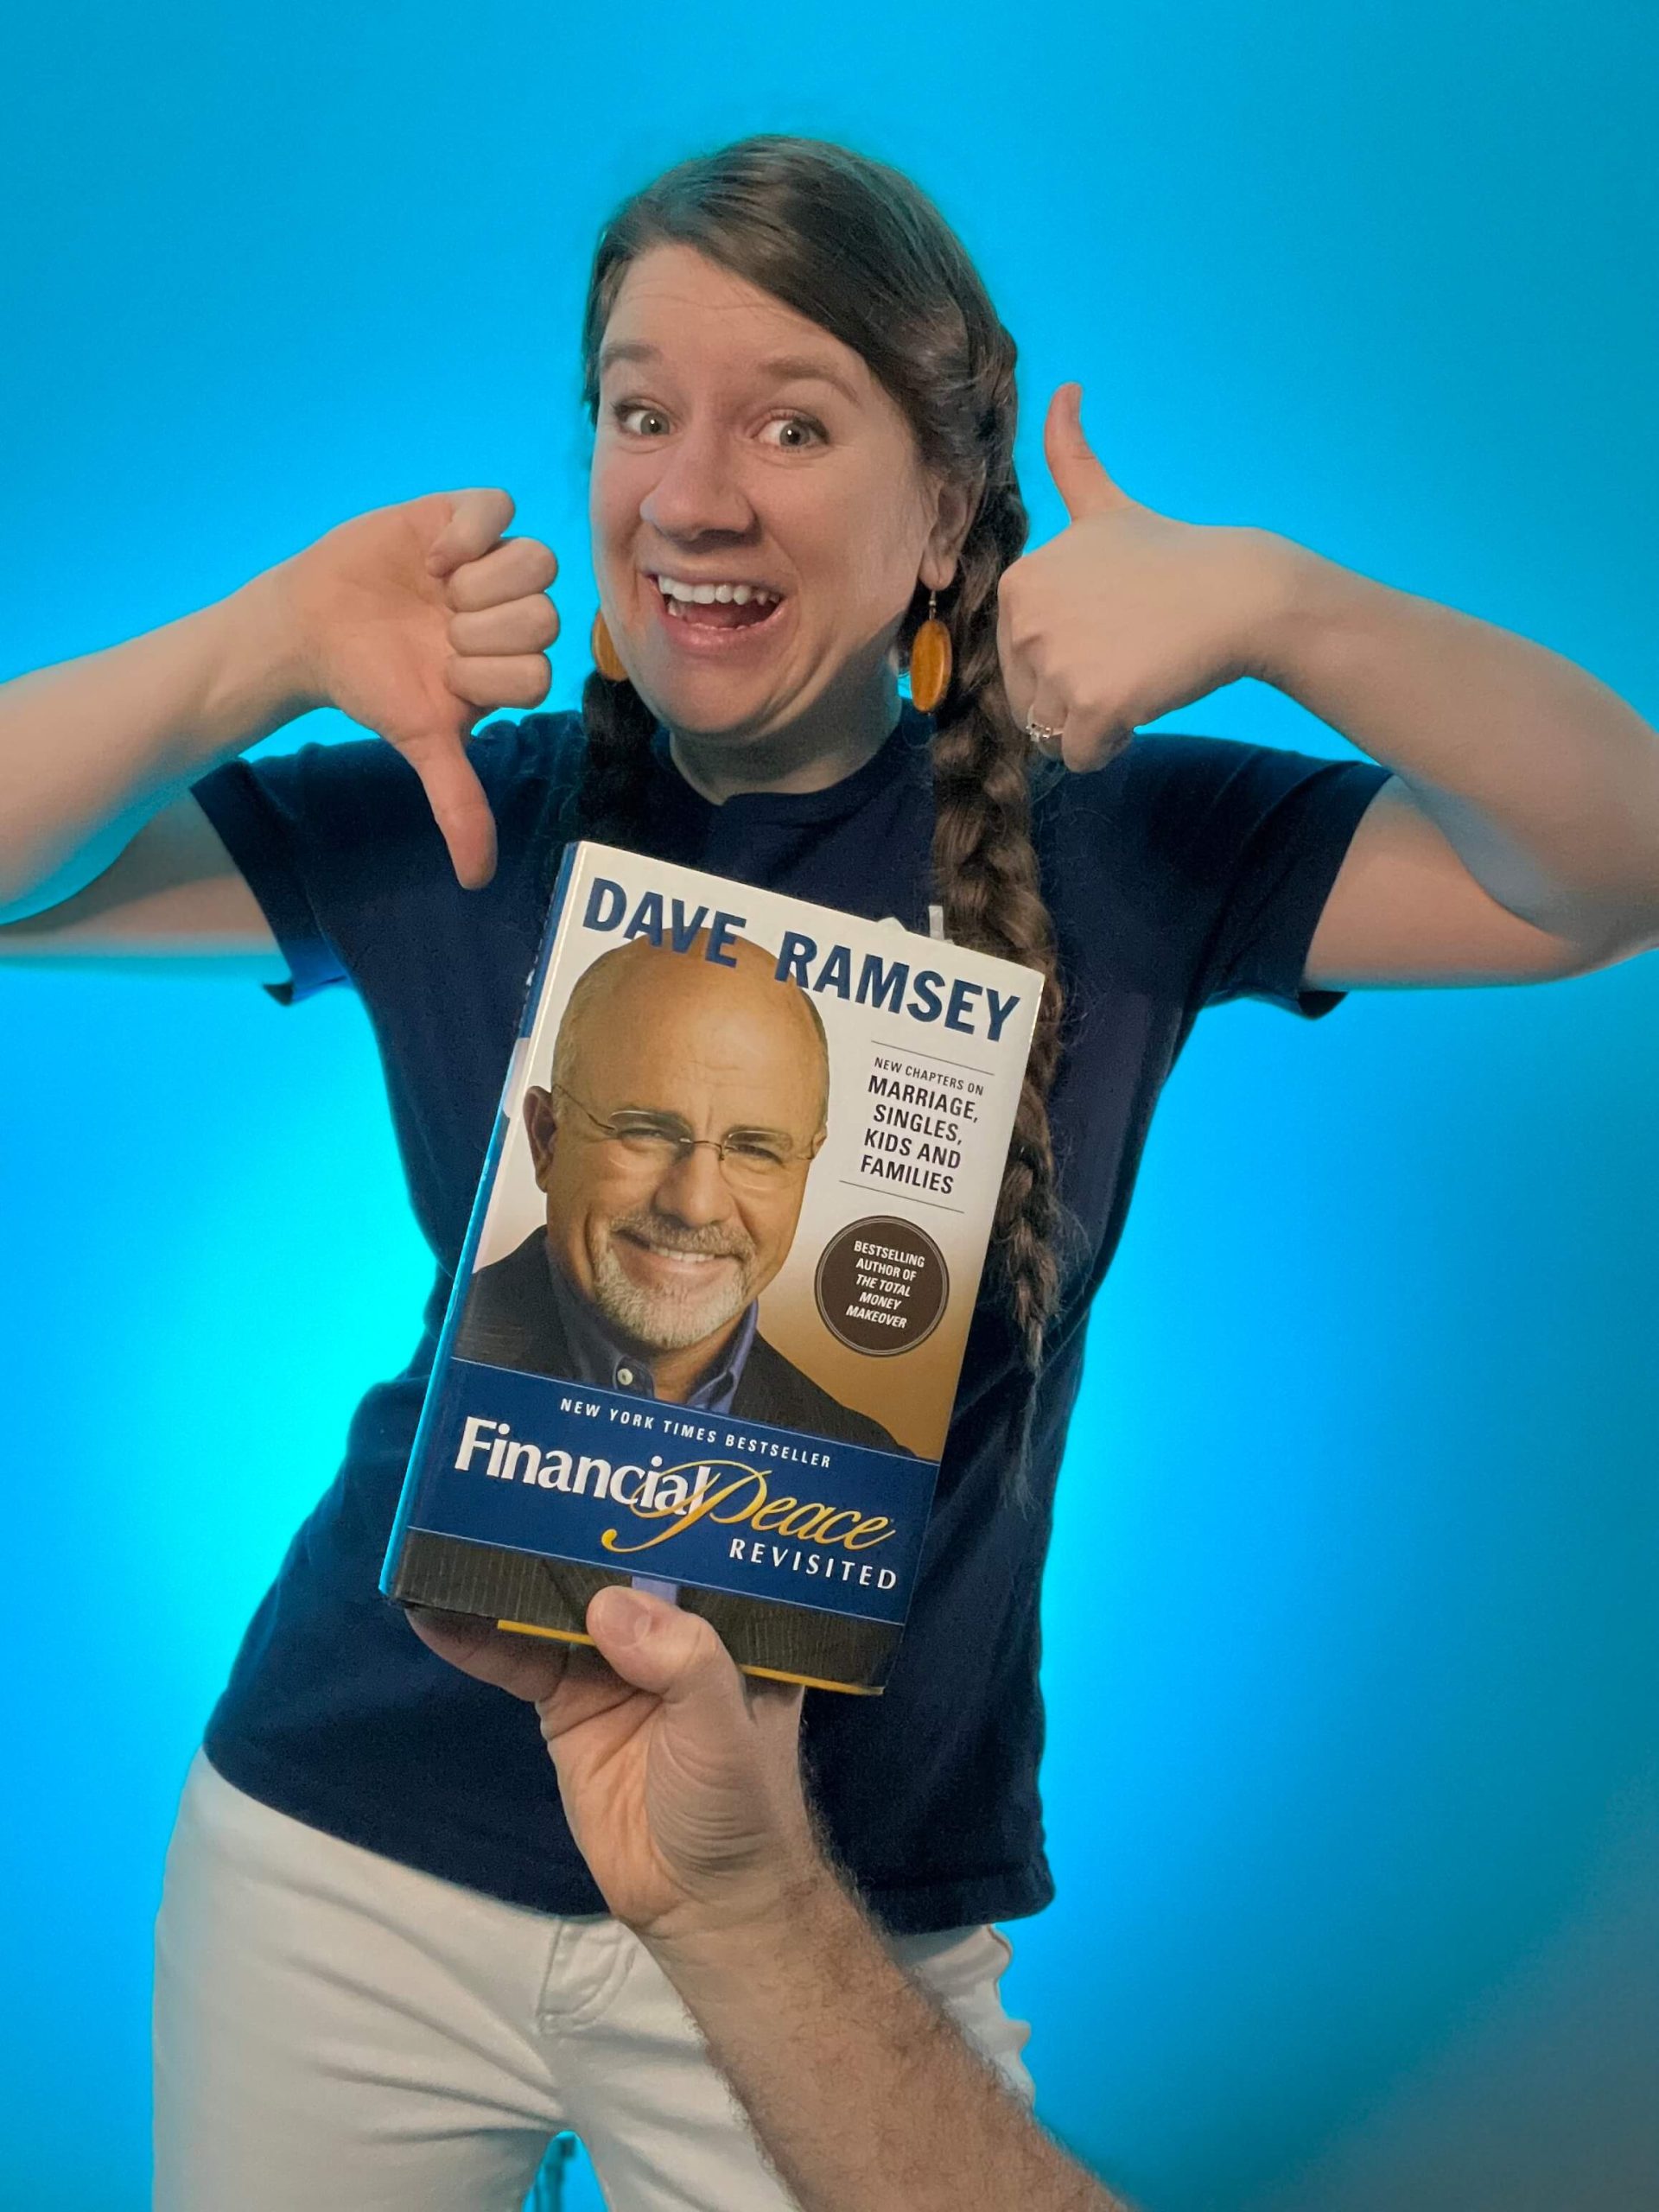 Should I follow Dave Ramsey?